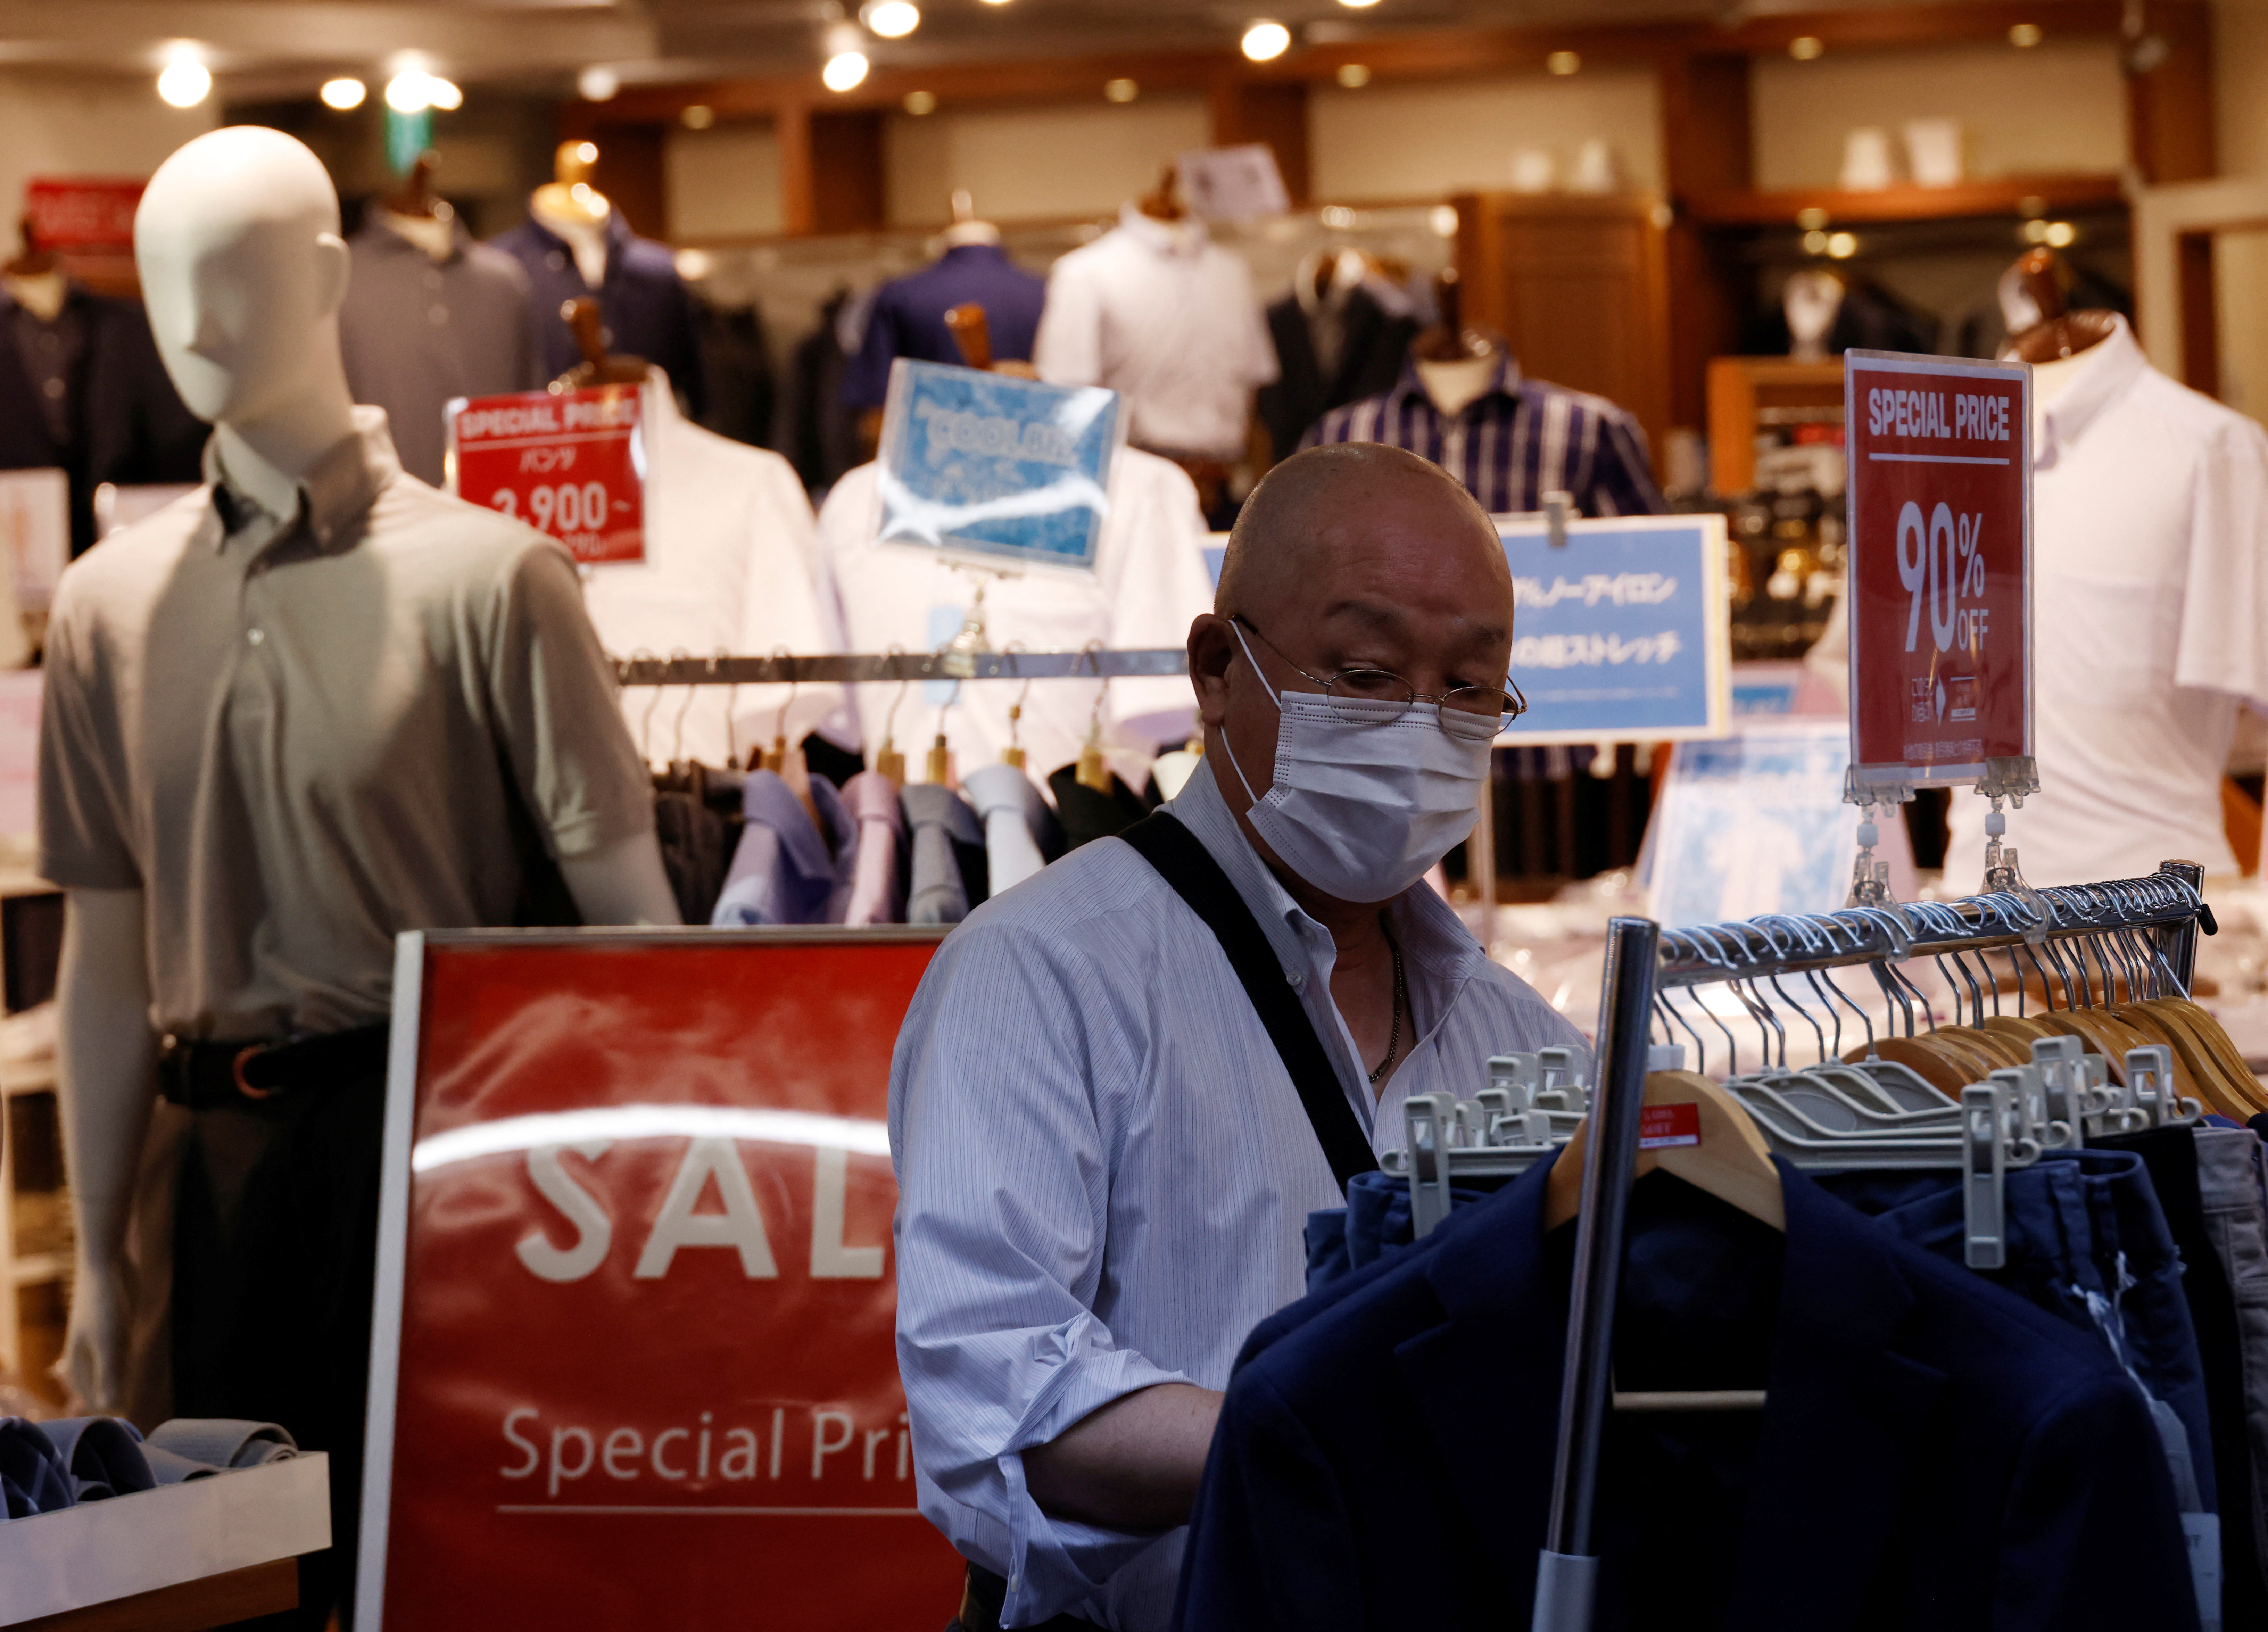 A customer chooses clothes at a shop at the Ameyoko shopping district in Tokyo